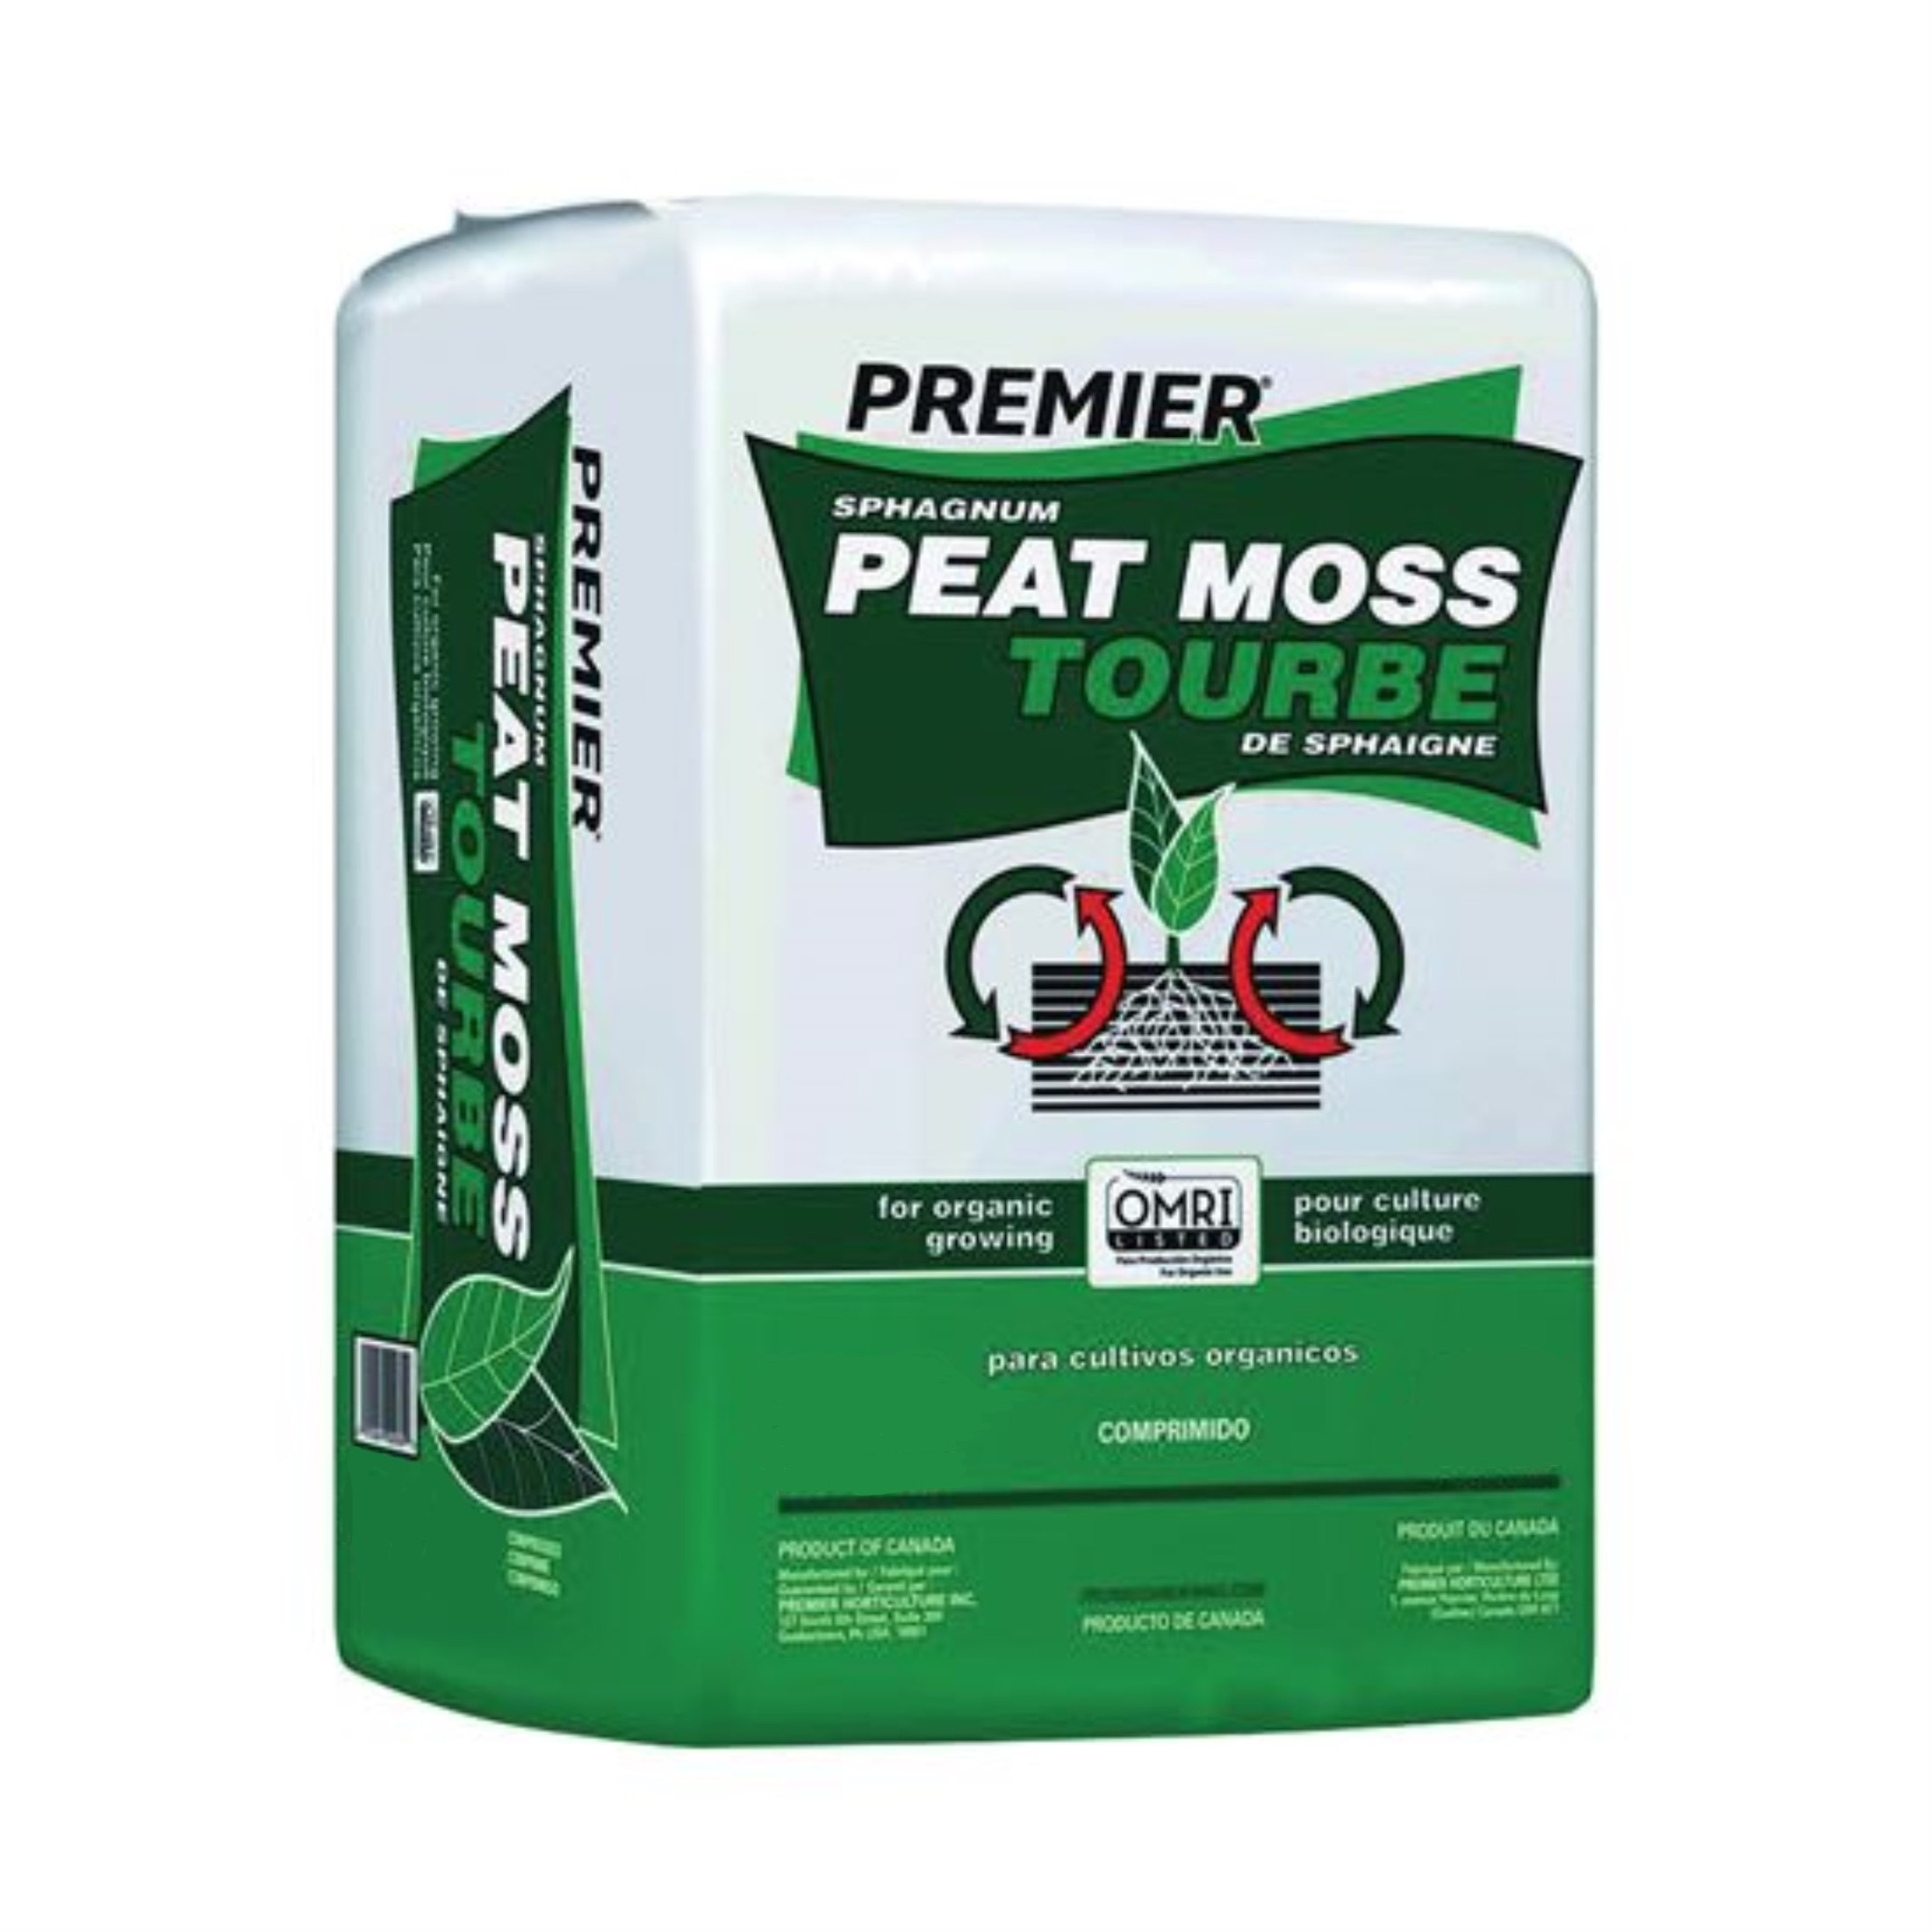 Premier Horticulture OMRI Listed Sphagnum Peat Moss